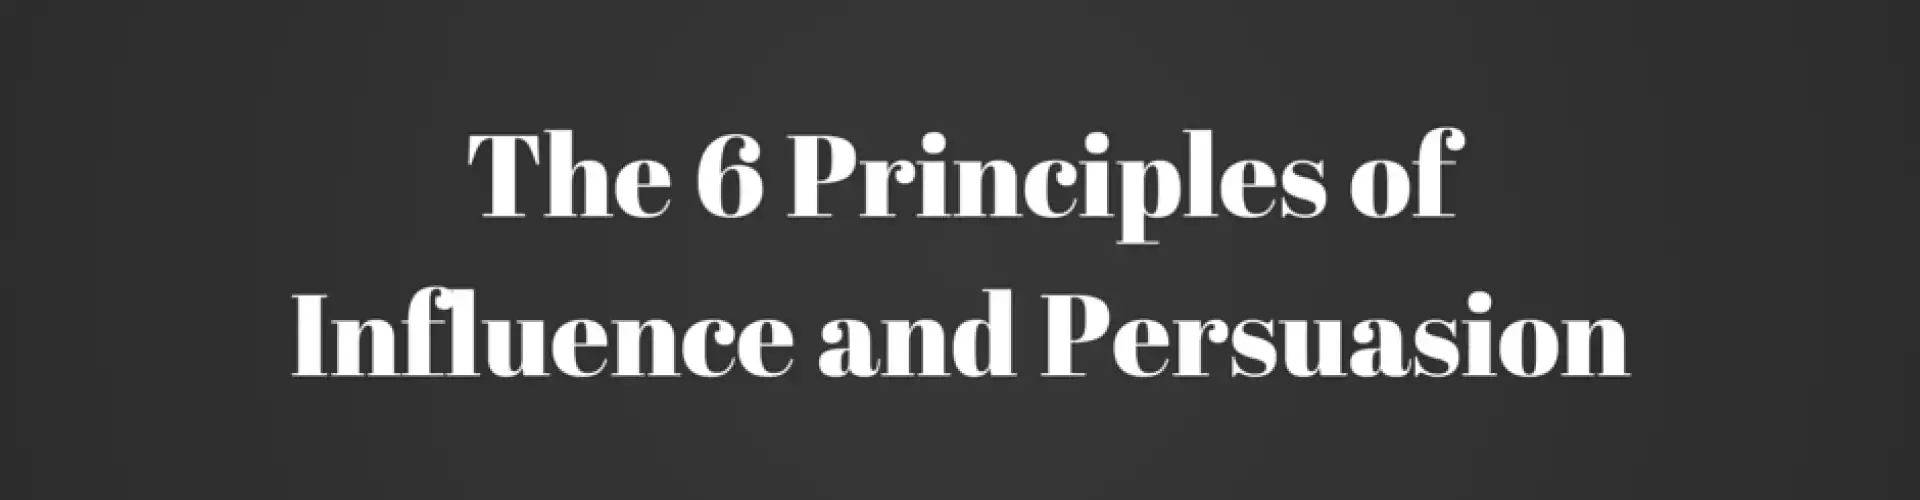 The 6 Principles of Influence and Persuasion